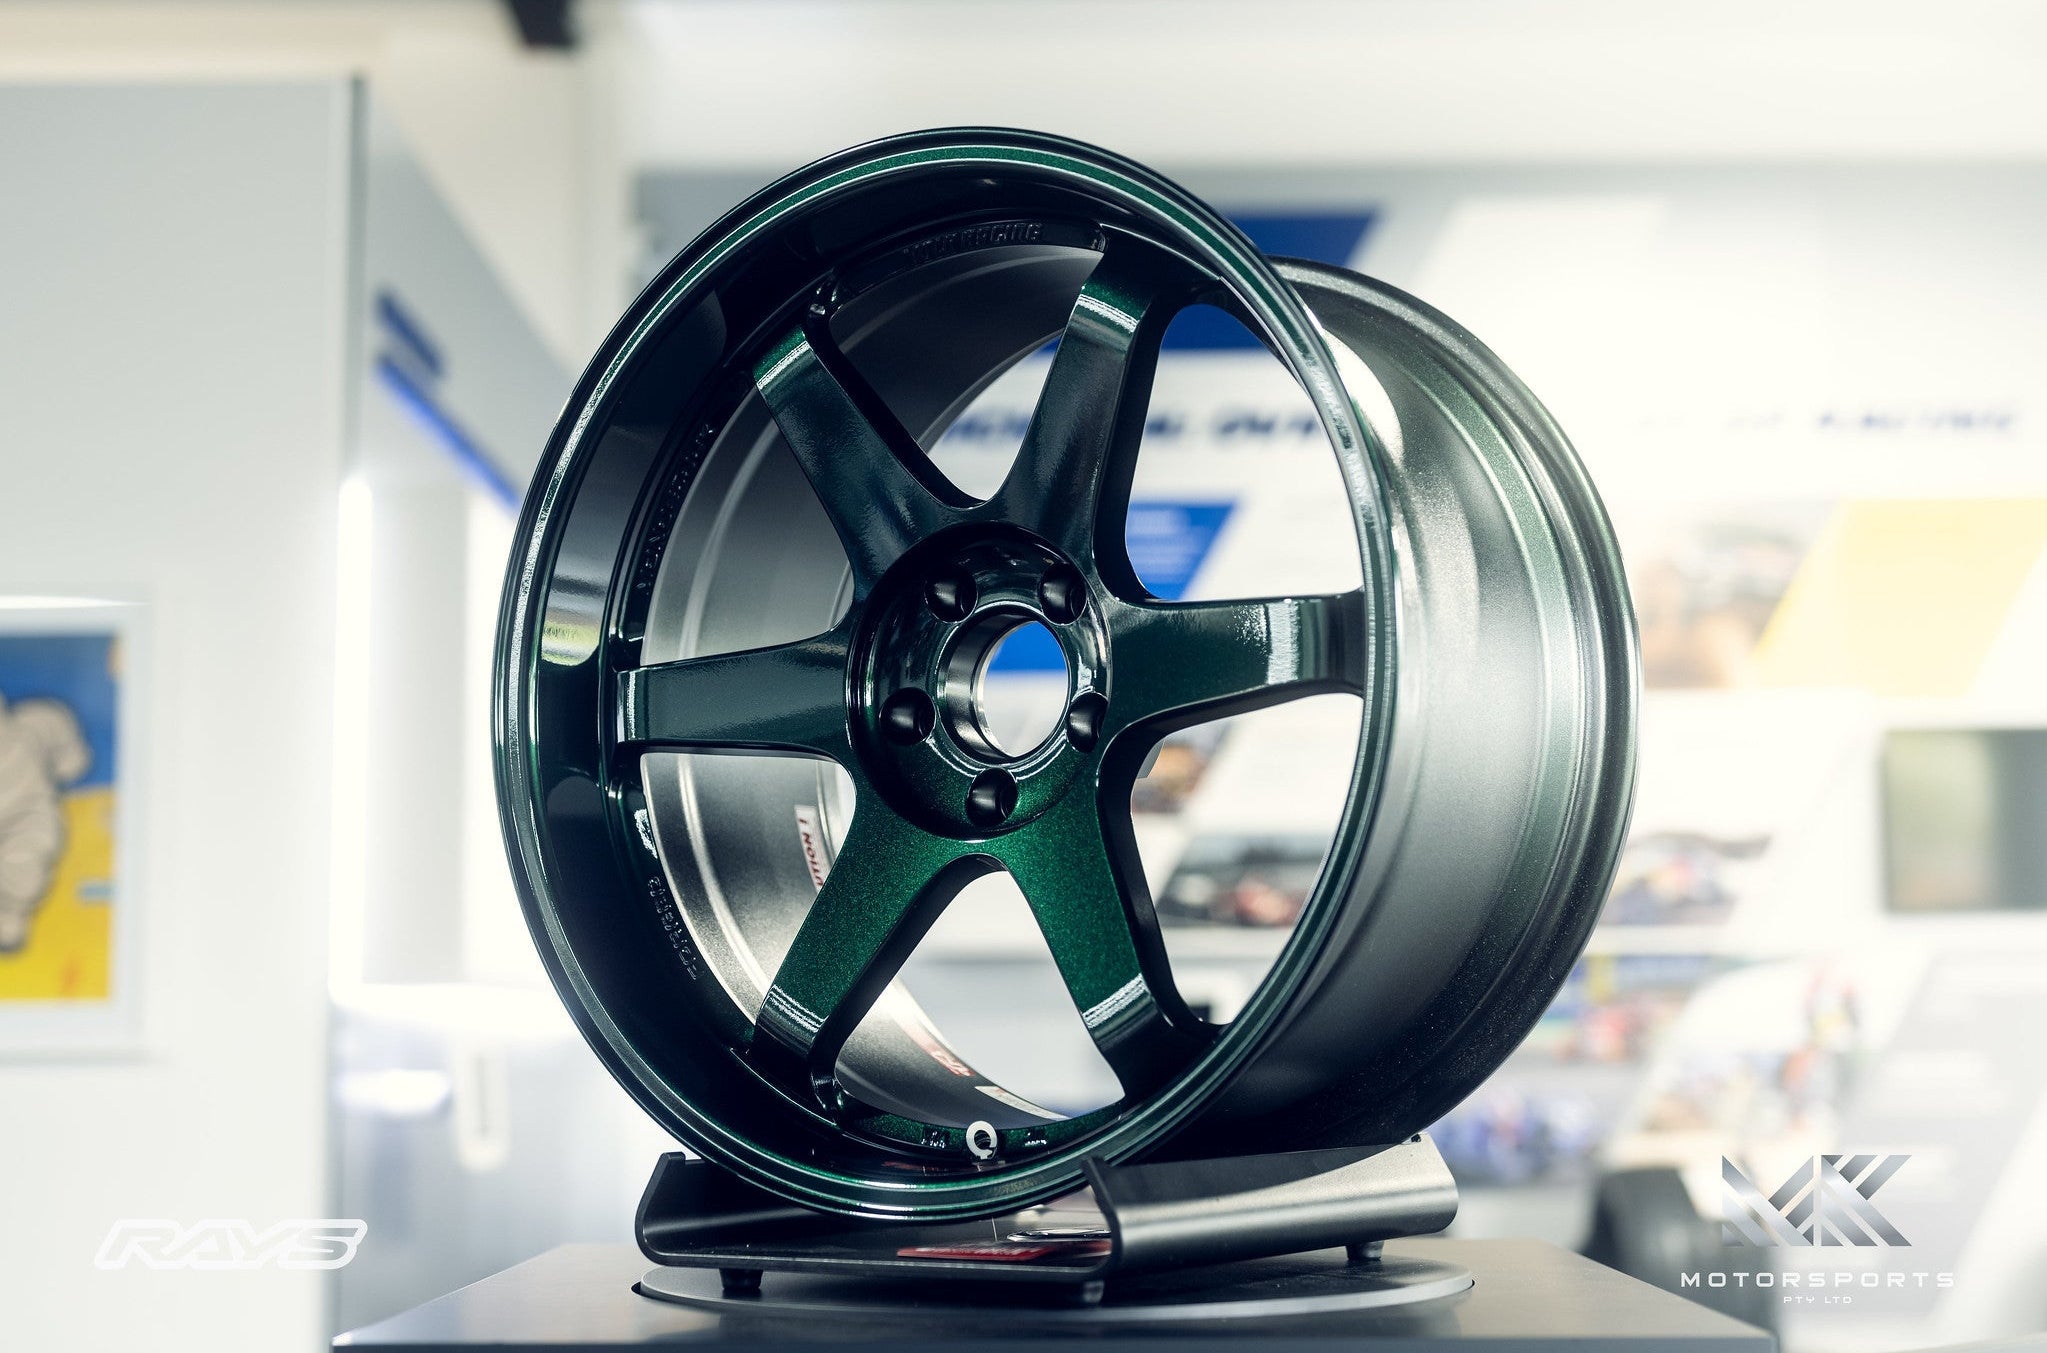 Volk Racing TE37SL 19" for R34 GT-R - Premium Wheels from Volk Racing - From just $4990.00! Shop now at MK MOTORSPORTS